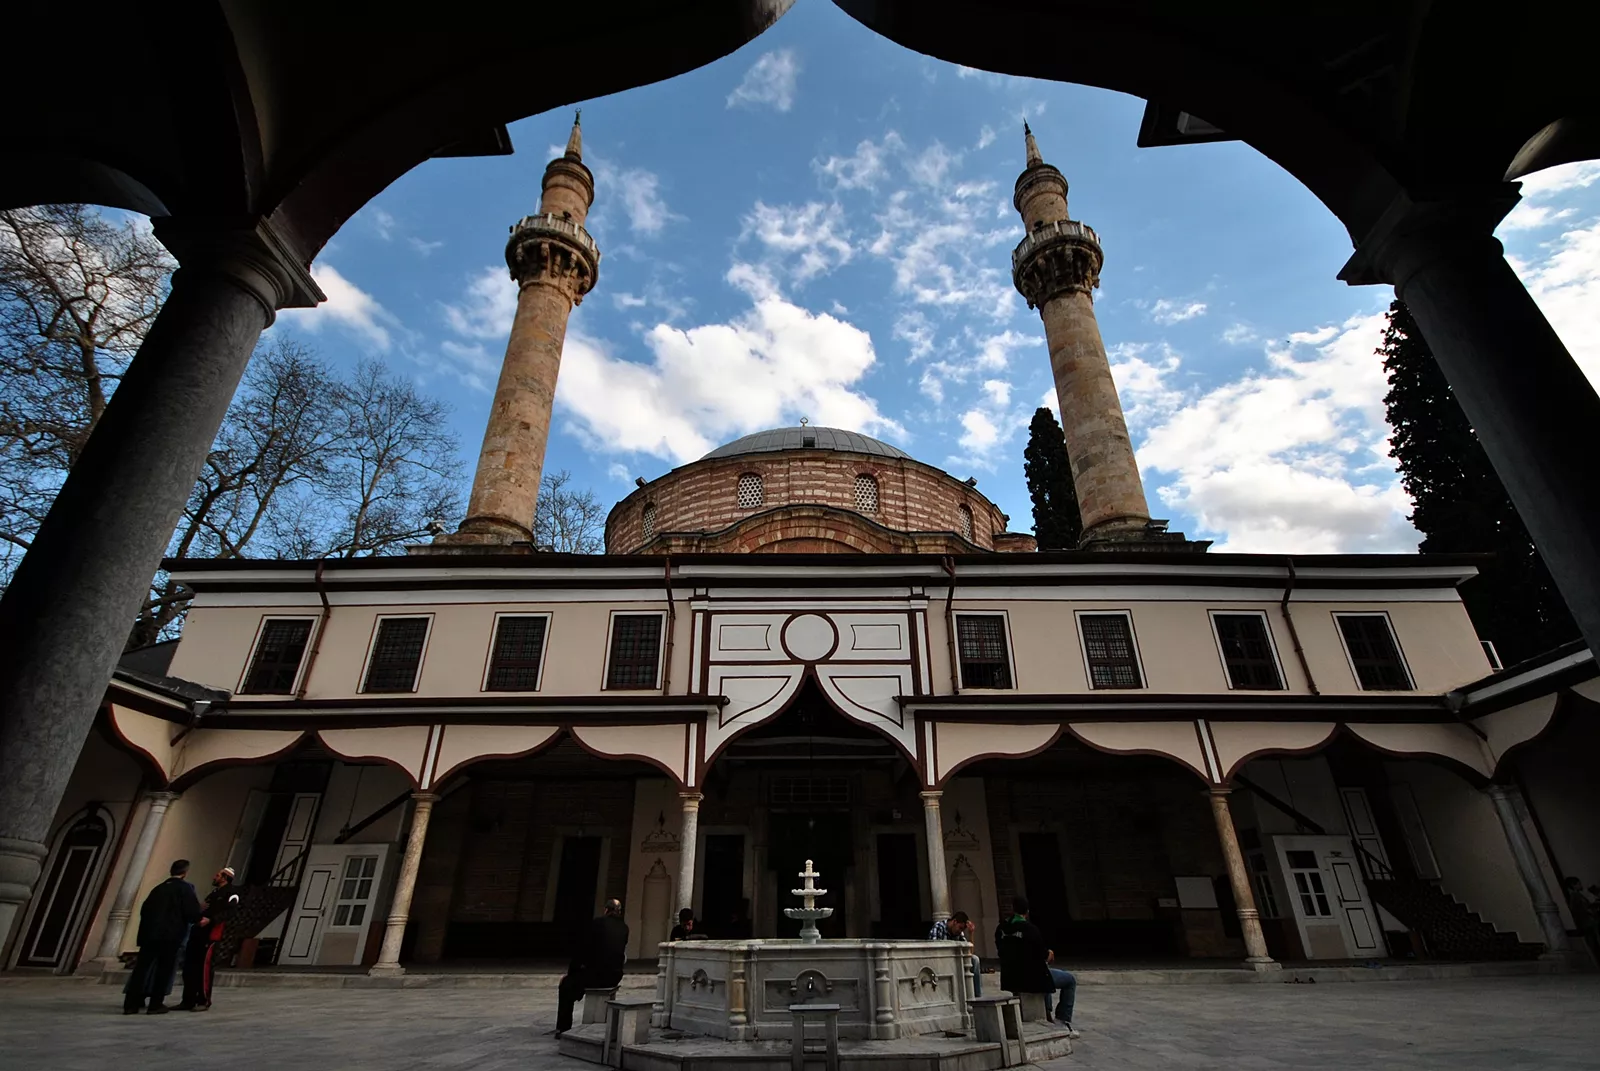 Emir Sultan Mosque in Turkey, Central Asia | Architecture - Rated 4